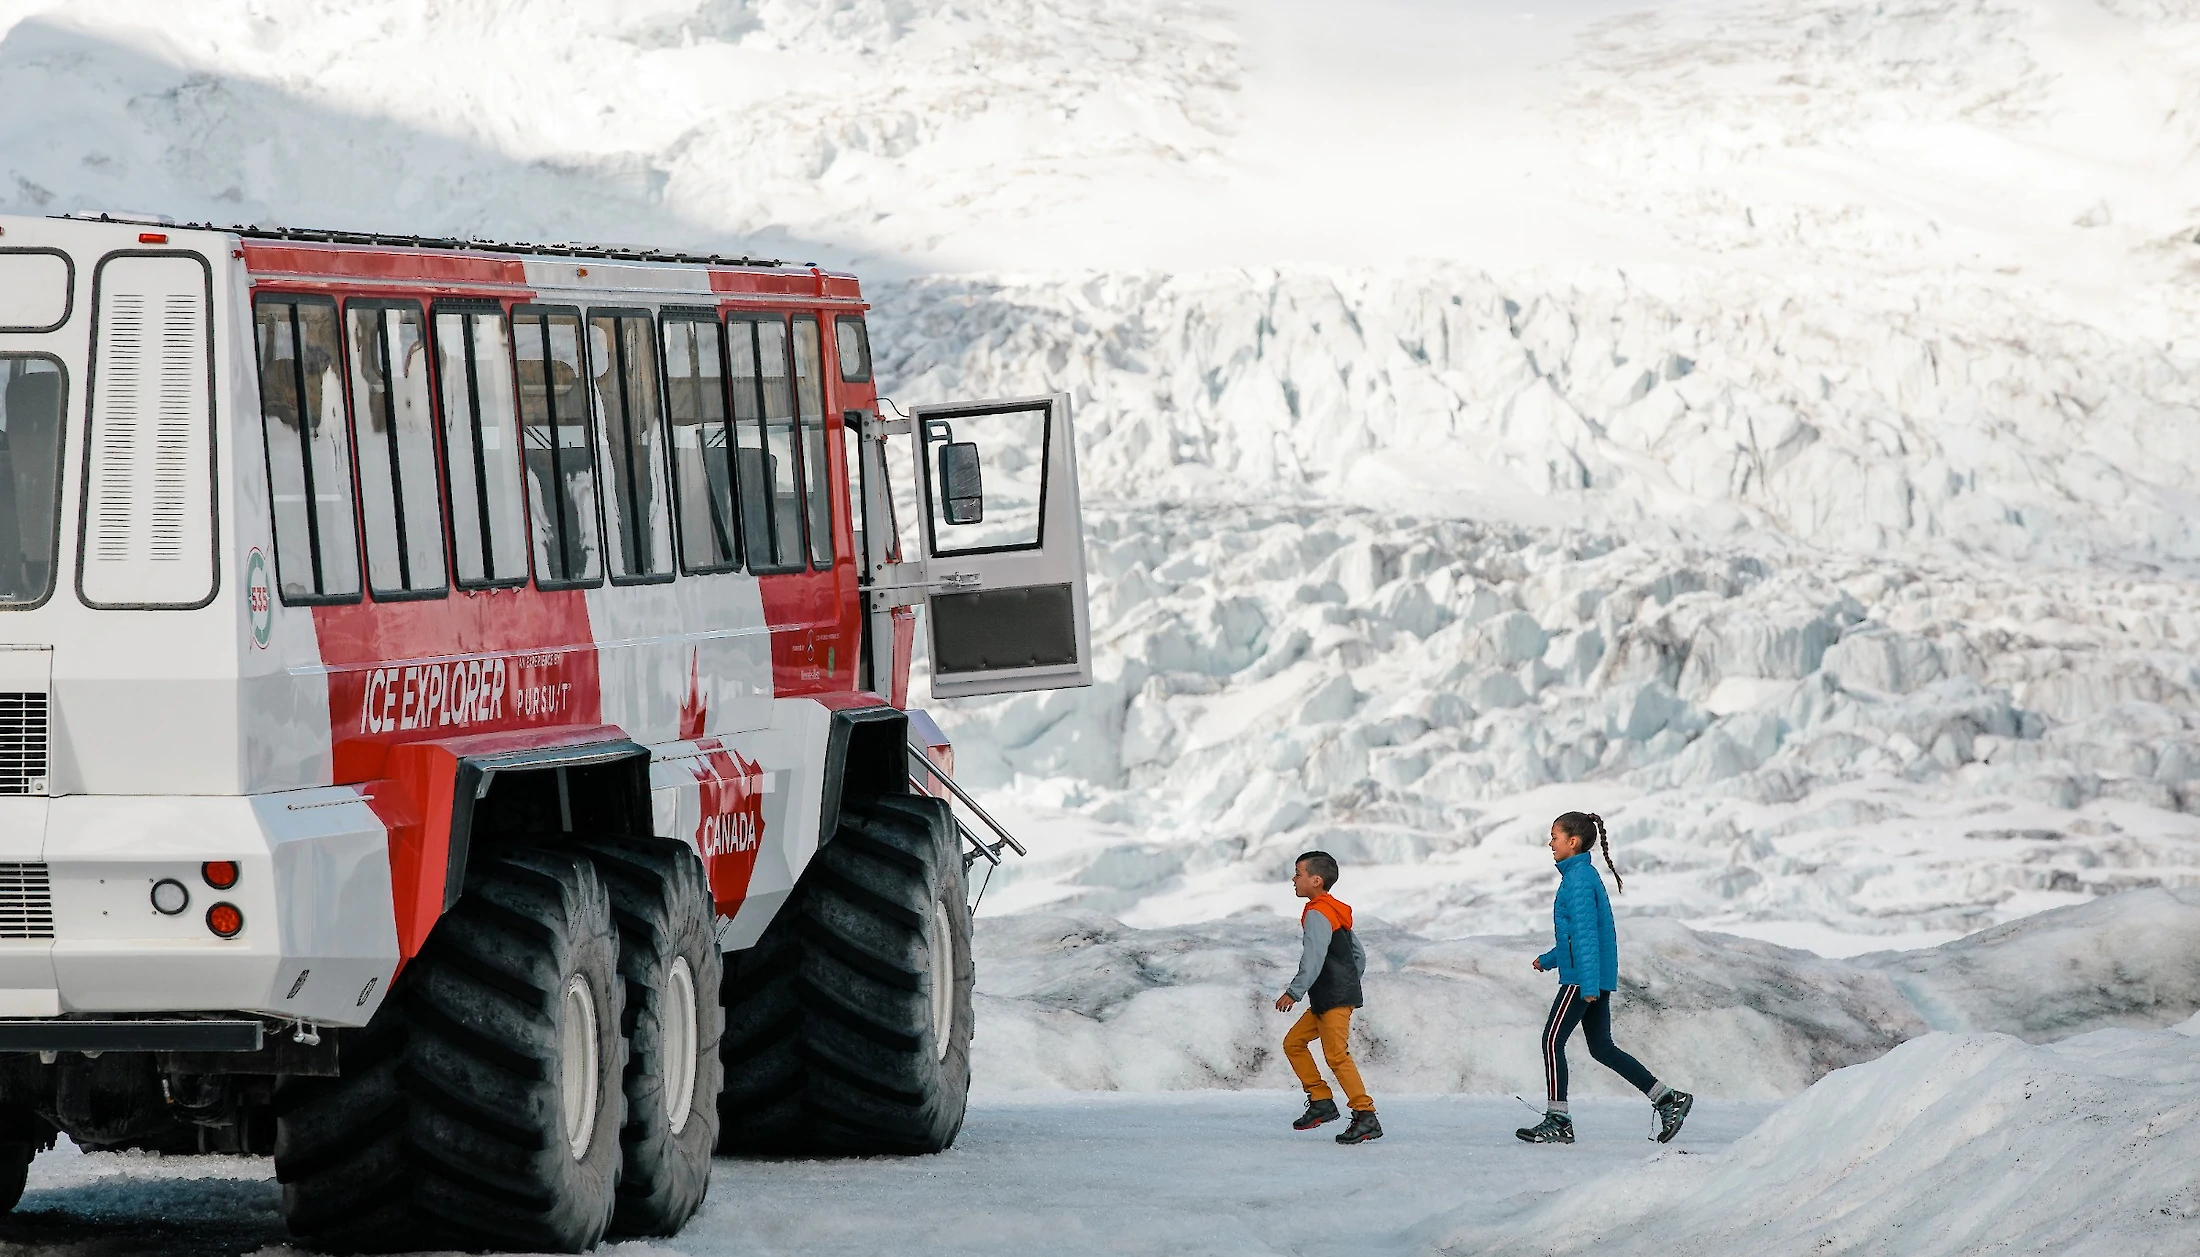 Two Children getting on the Ice Explorer bus on the Columbia Icefield Glacier